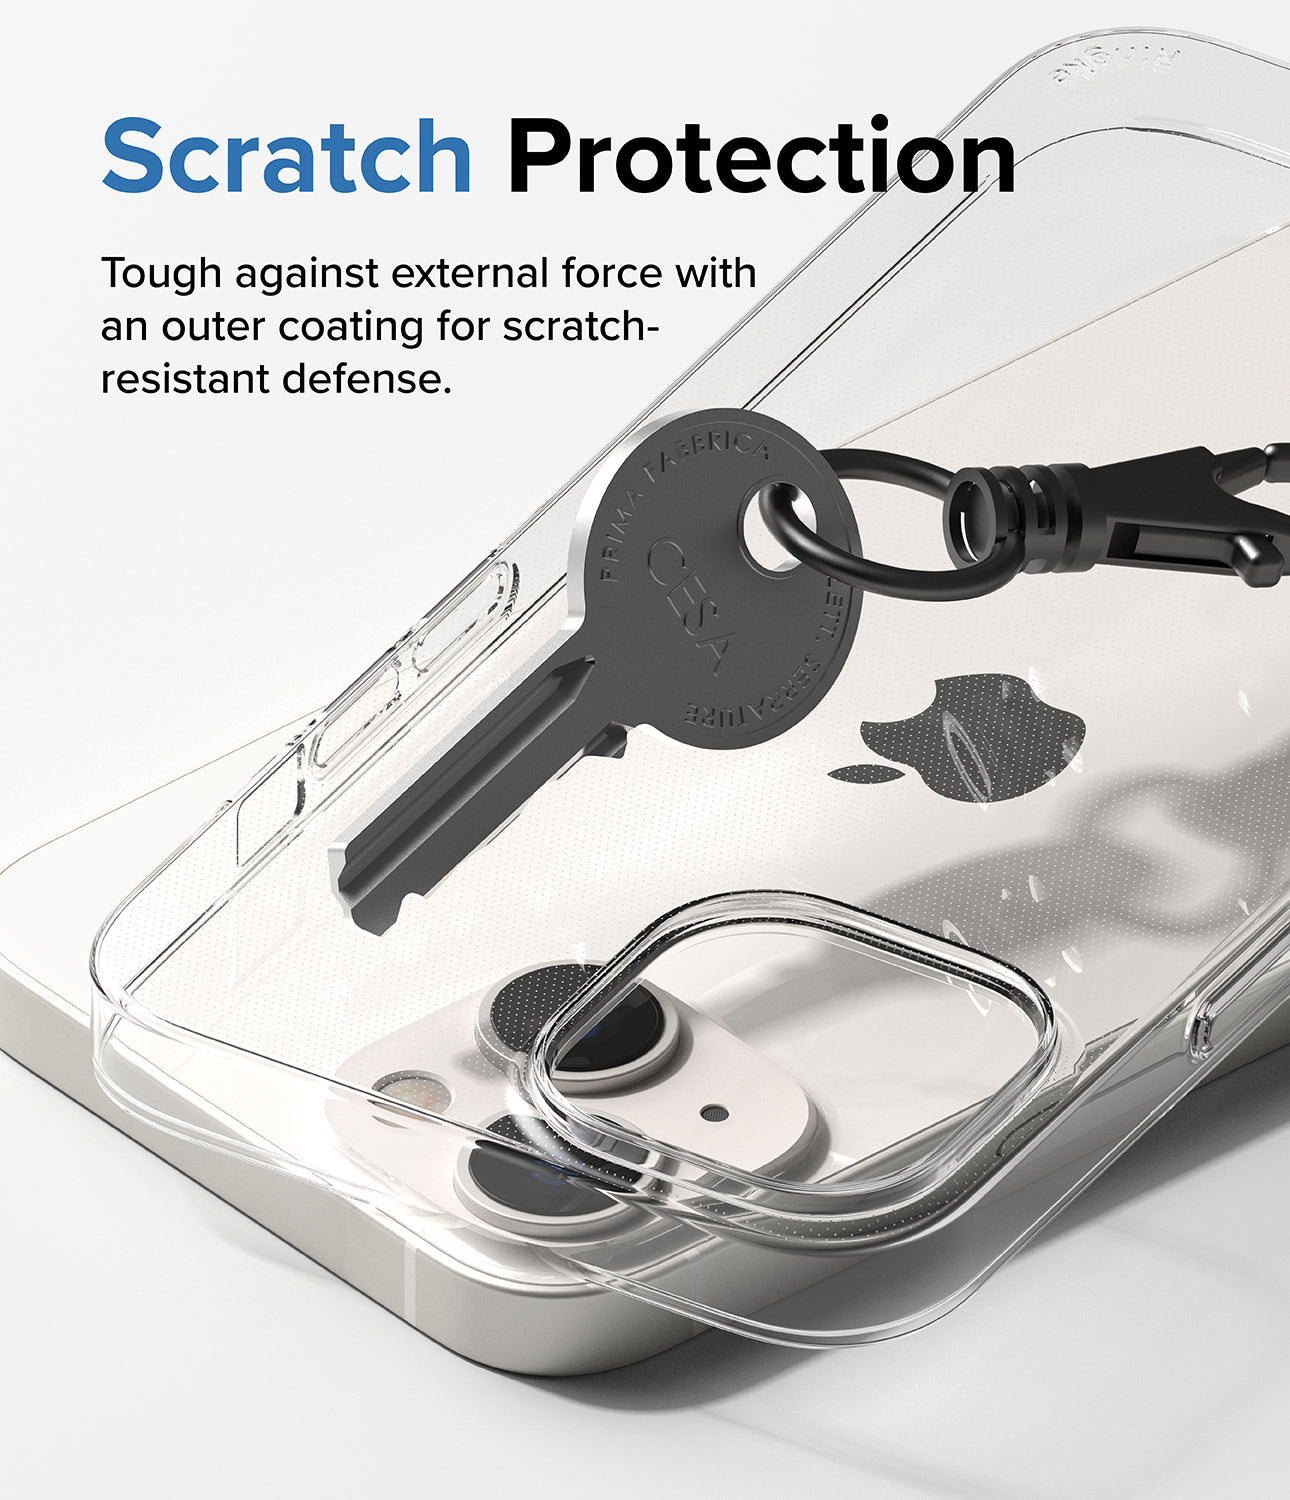 iPhone 14 Case | Slim - Scratch Protection. Touch against external force with an outer coating for scratch-resistant defense.